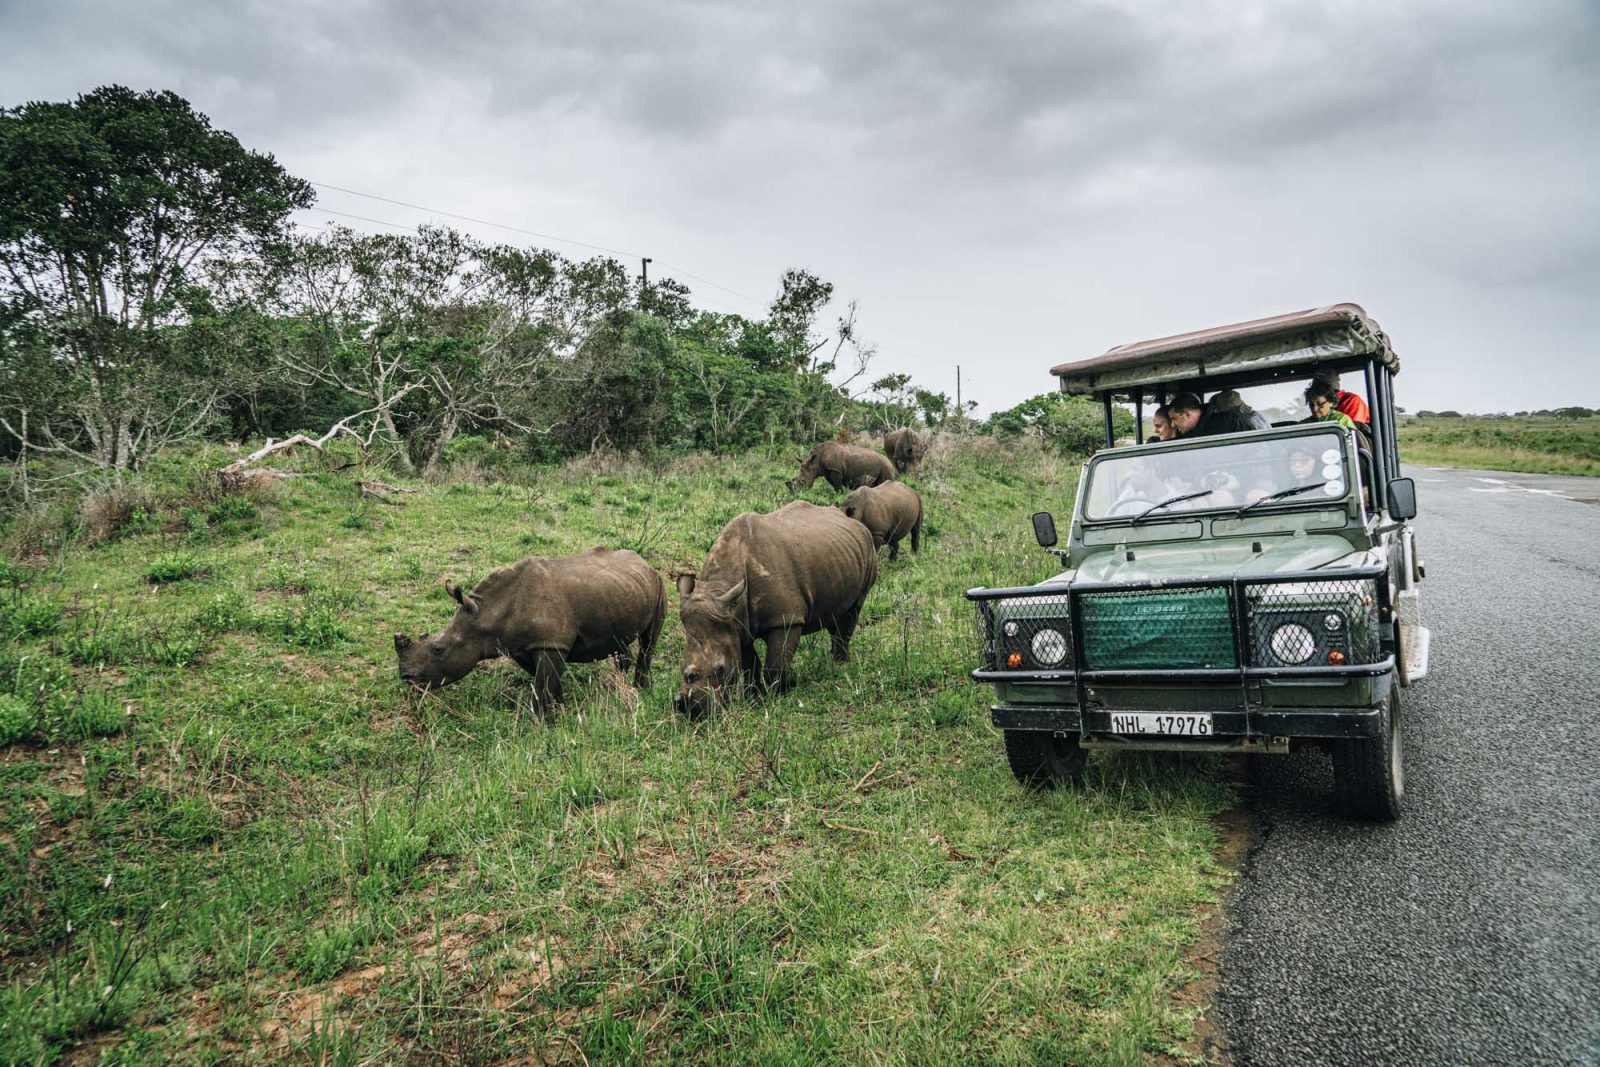 1 Week South Africa Itinerary: The Best of Wildlife and Nature from Johannesburg to Durban